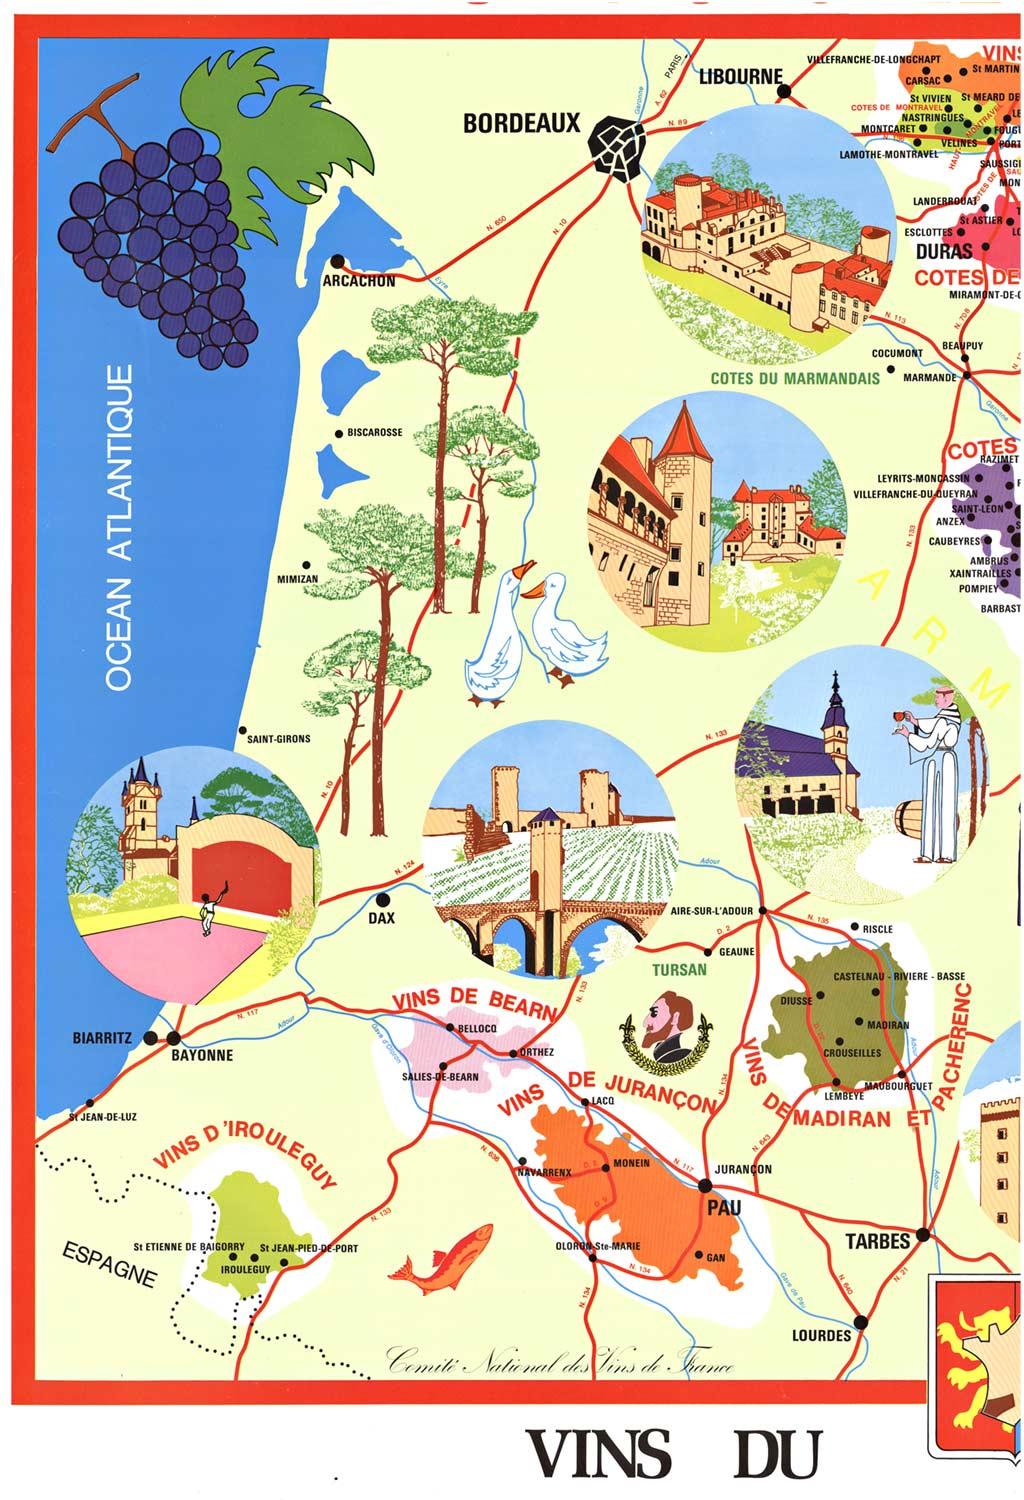 sud ouest wine map